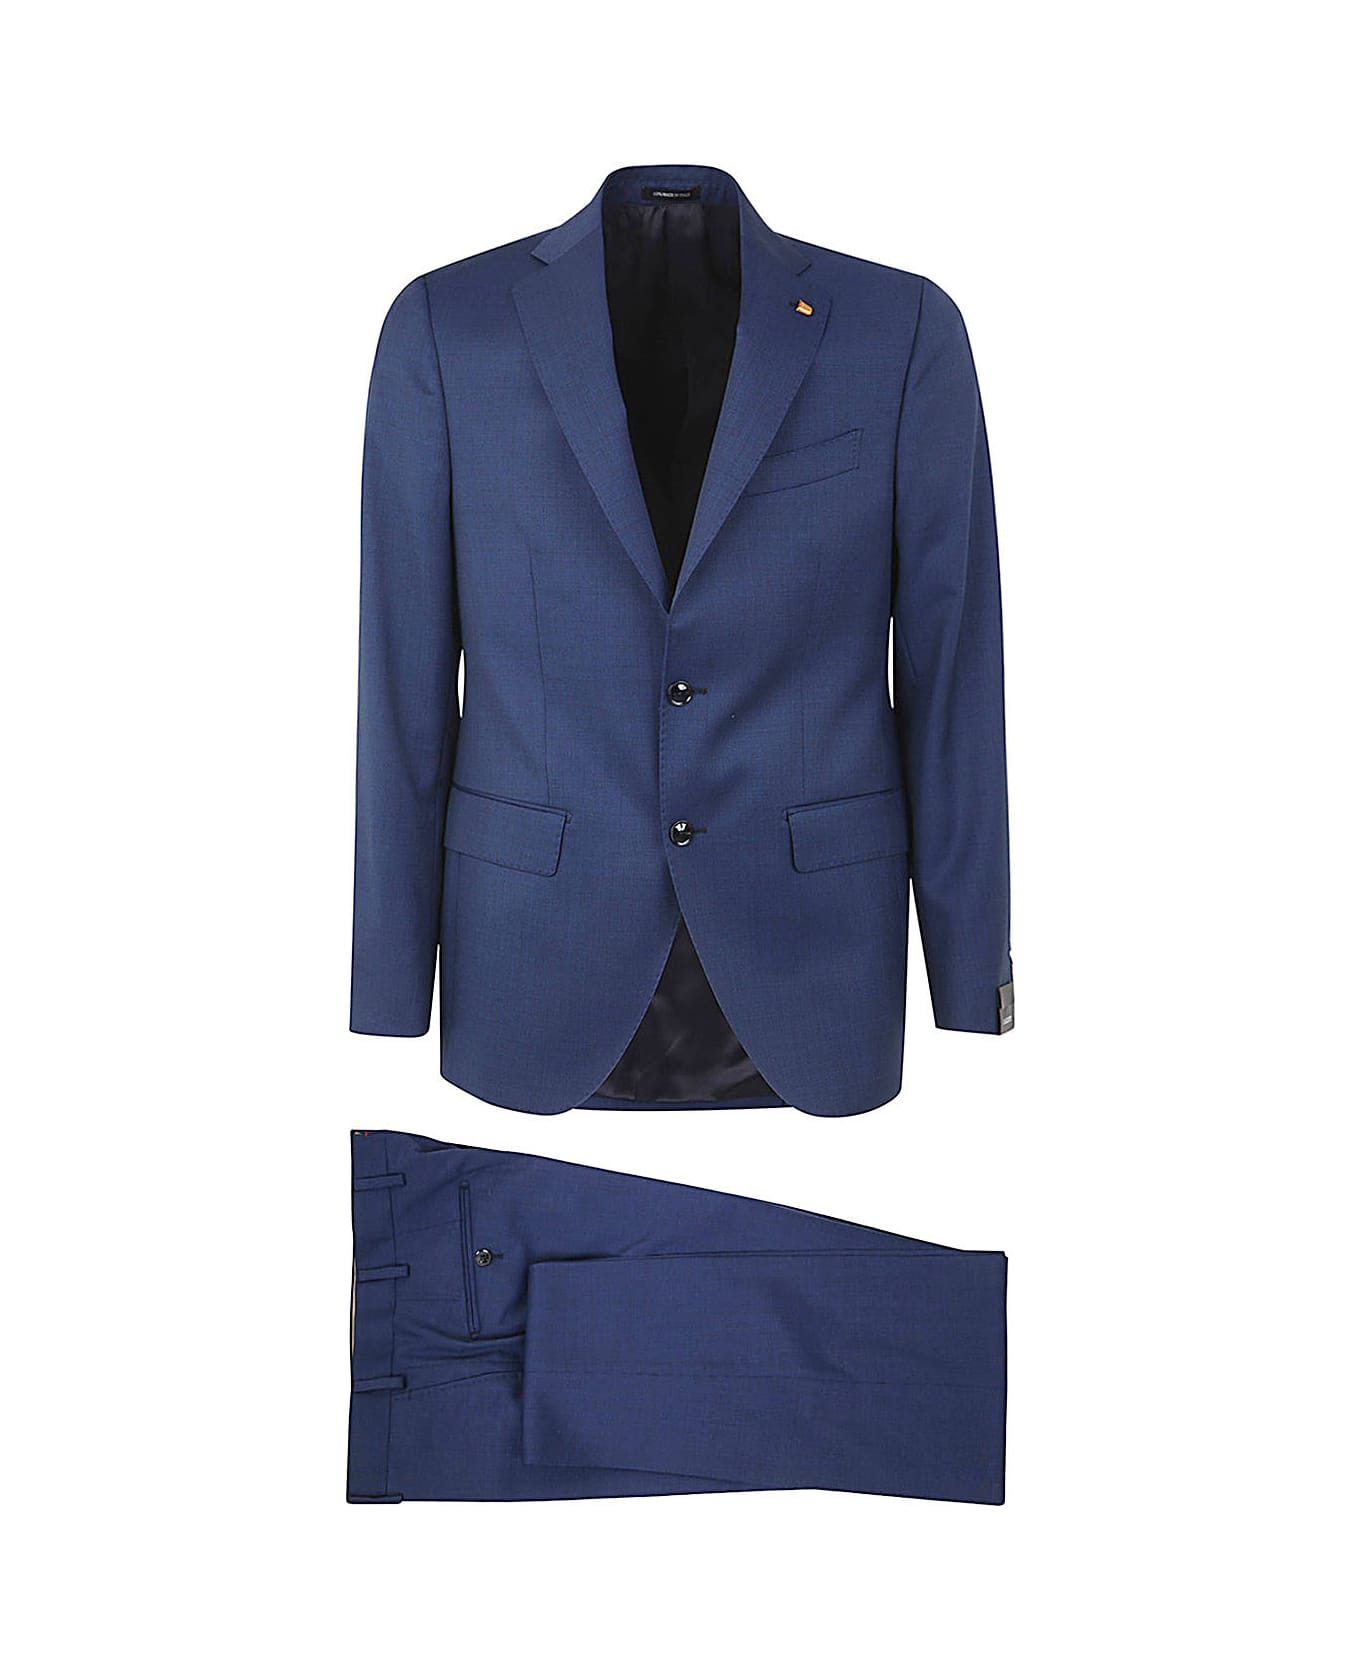 Sartoria Latorre Wool Suit With Two Buttons - Blue